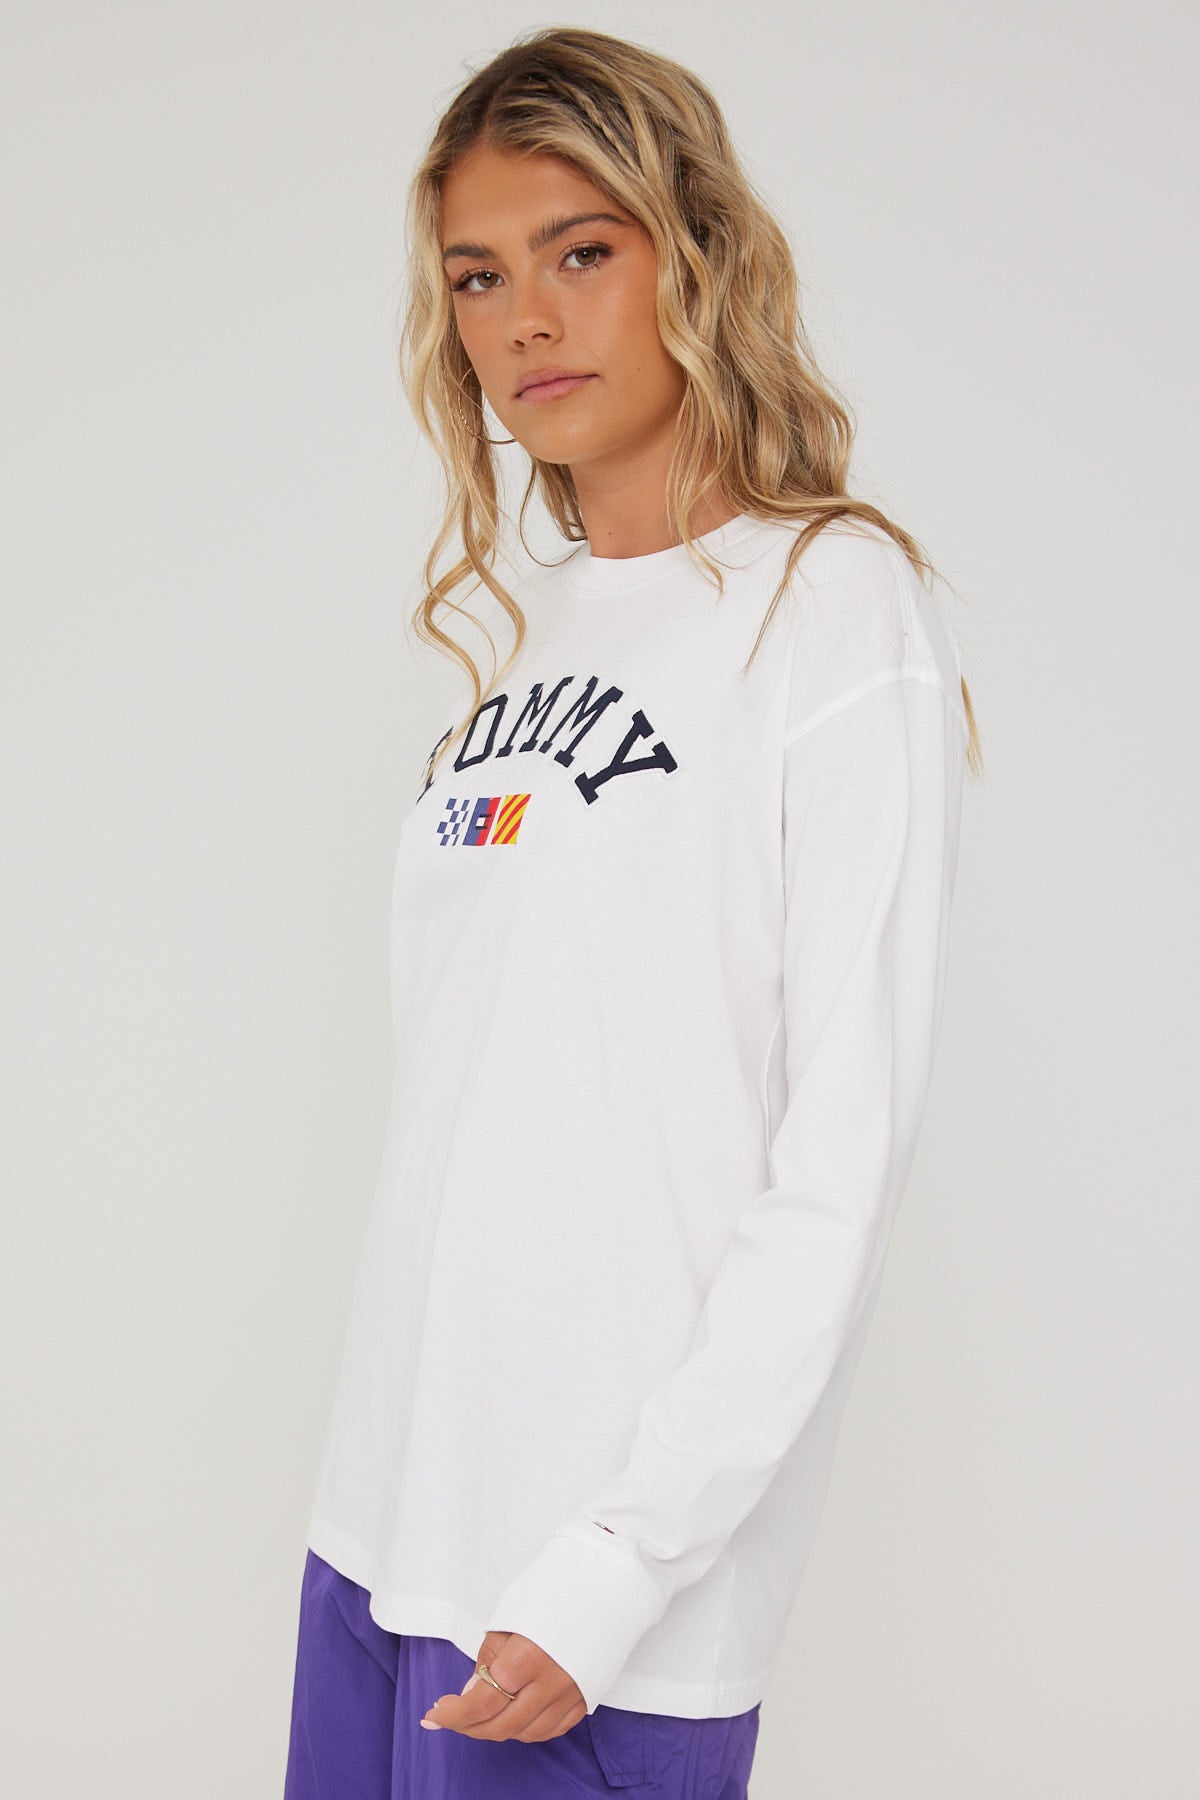 Tommy Jeans TJW OVR Archive 2 Long Sleeve Shirt White